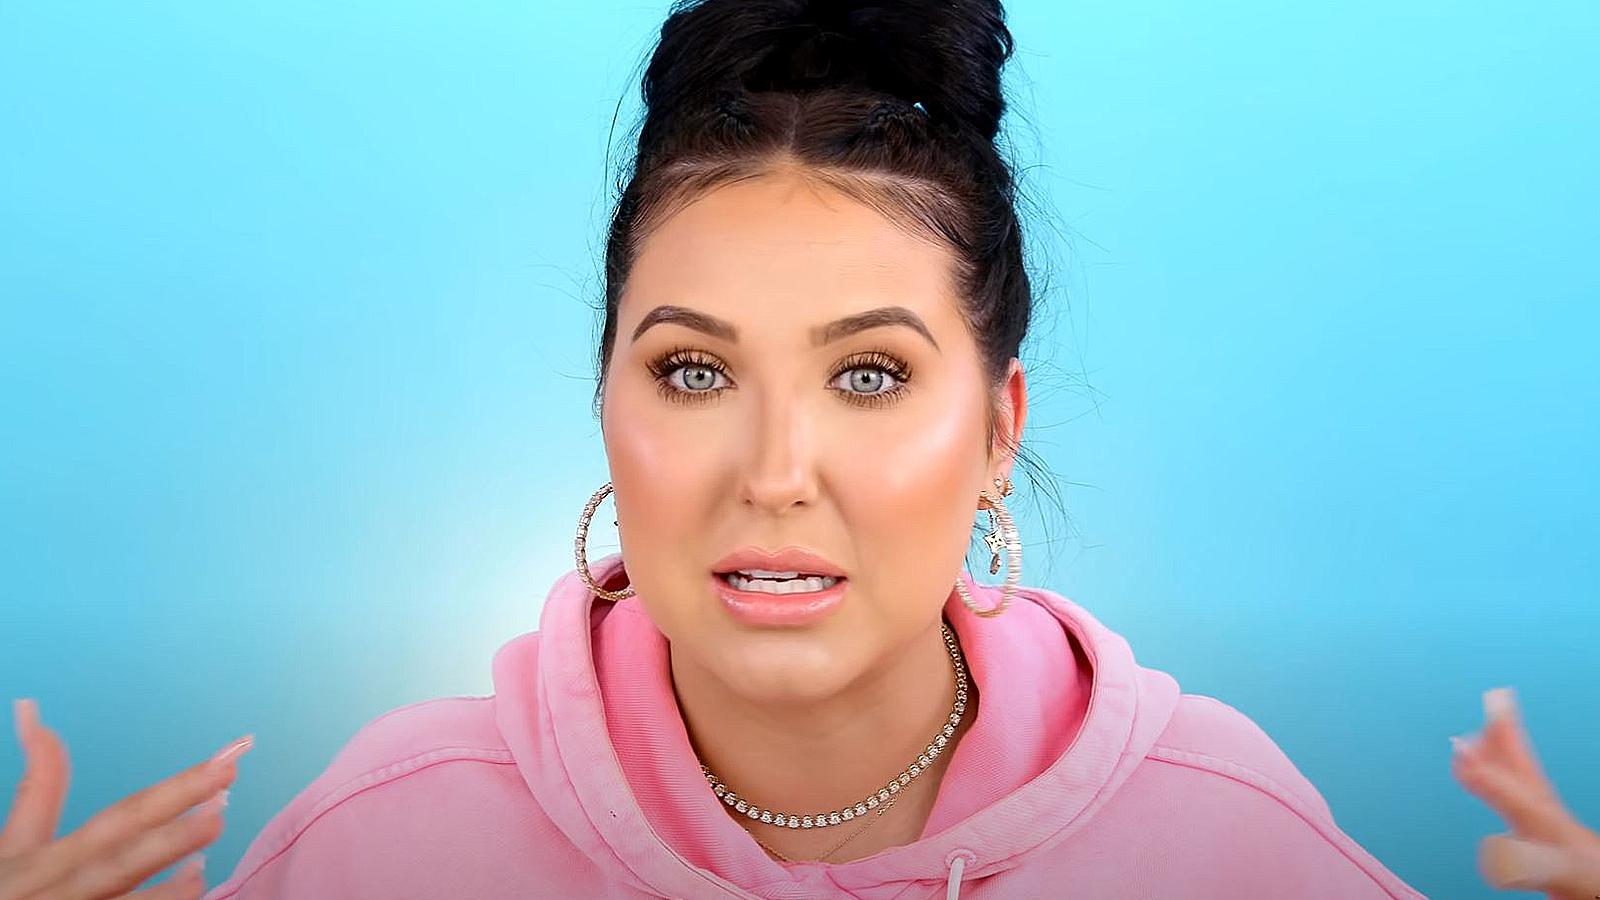 Jaclyn Hill speaks to her fans against a blue background.